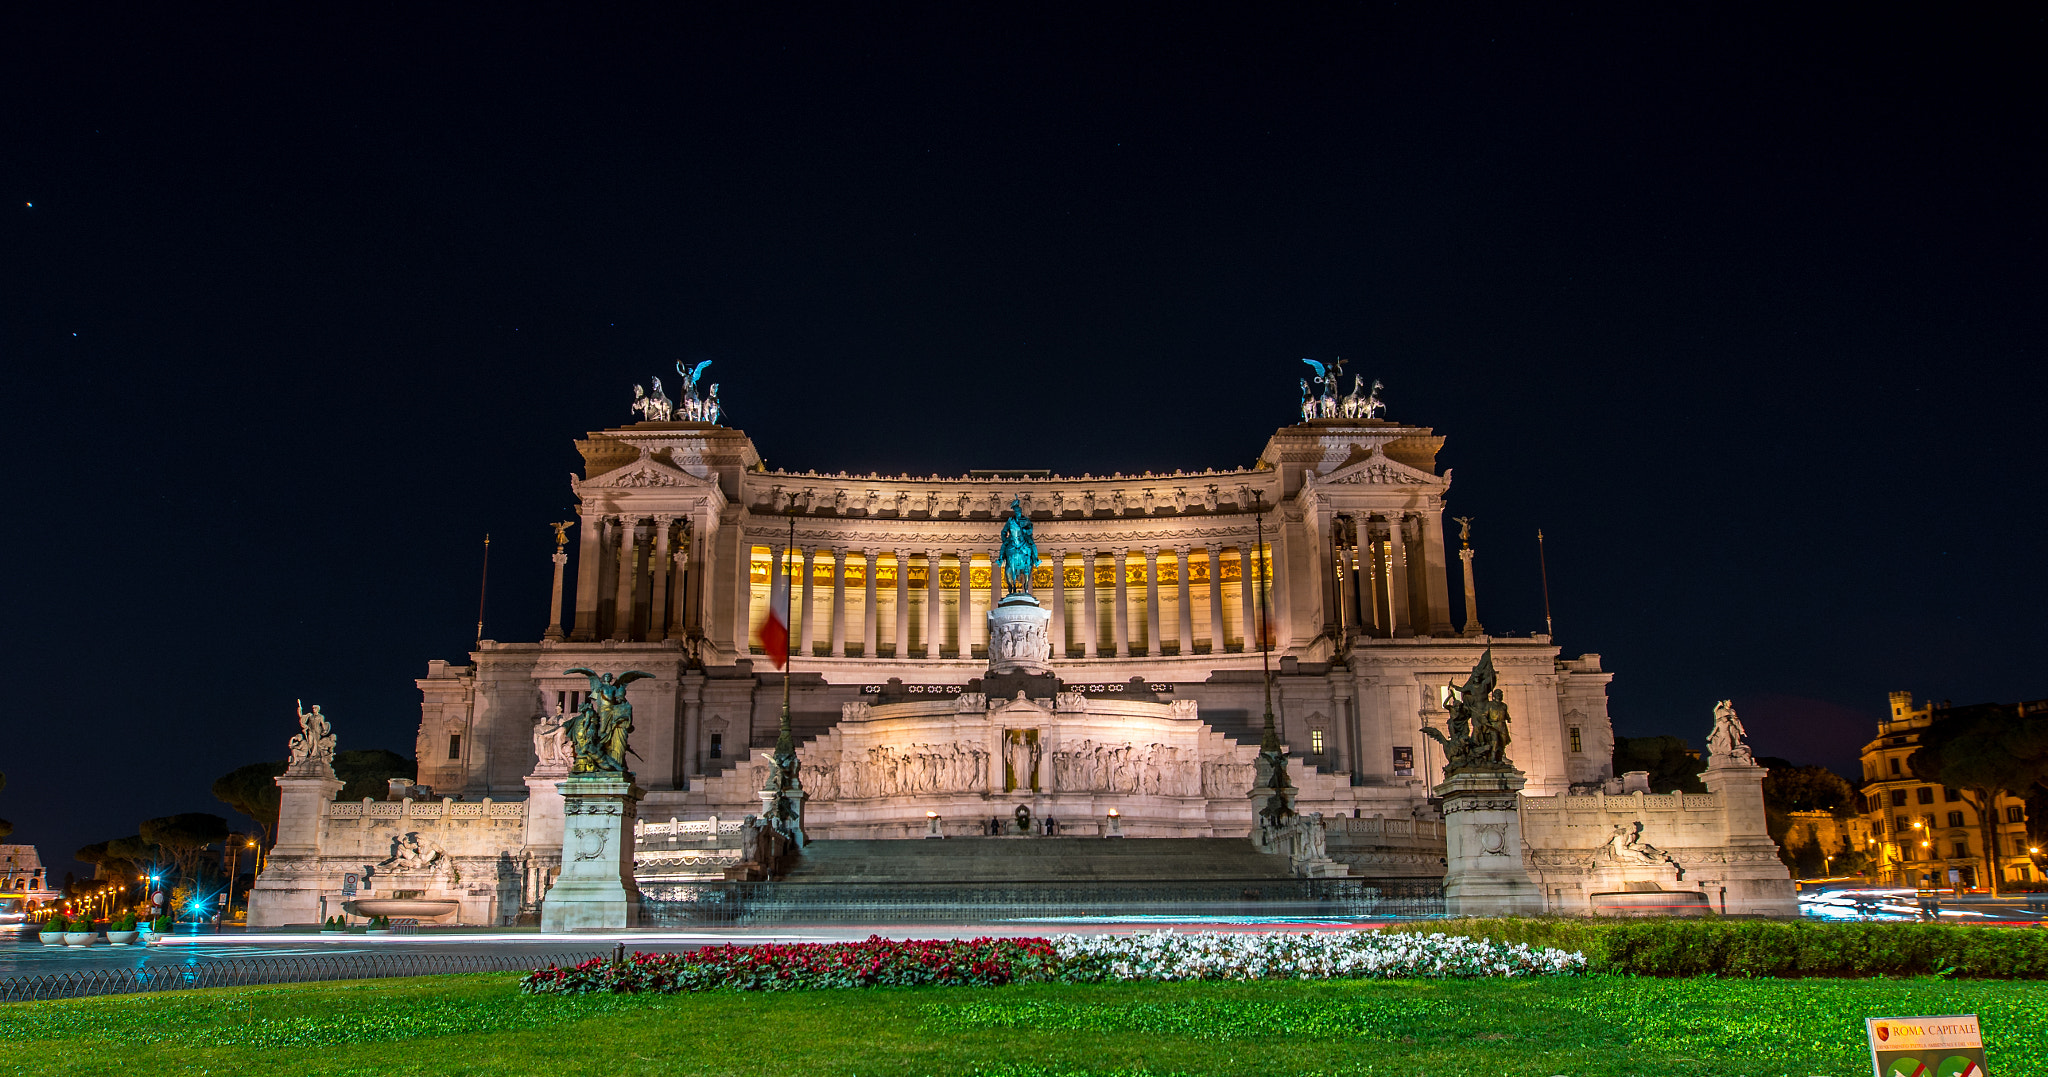 Sony a7R II + Sony DT 50mm F1.8 SAM sample photo. The monumento nazionale a vittorio emanuele ii photography